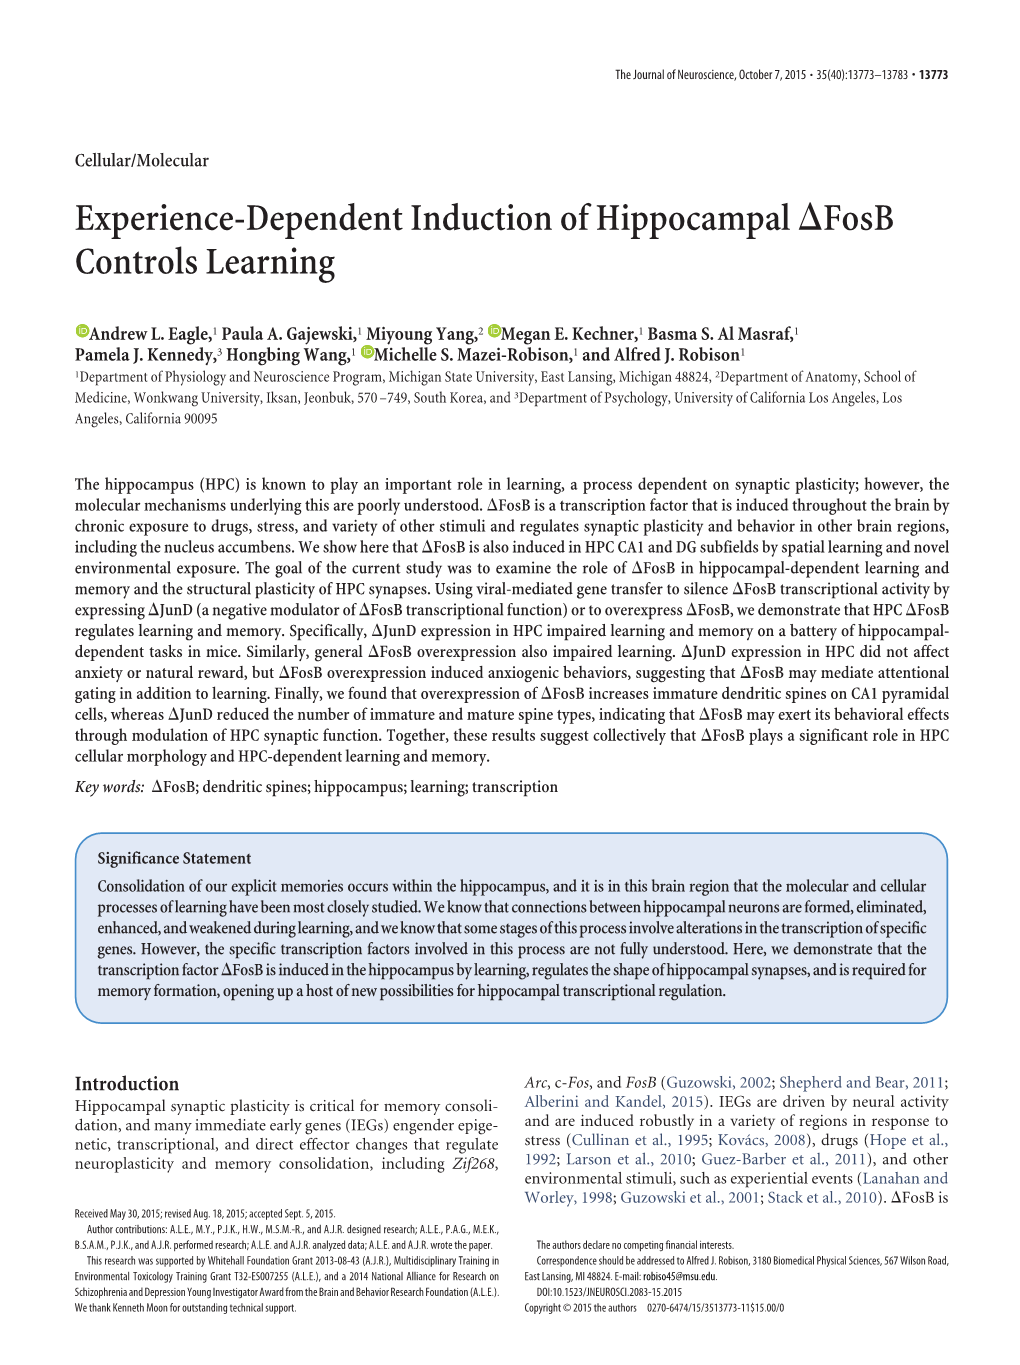 Experience-Dependent Induction of Hippocampal Fosb Controls Learning